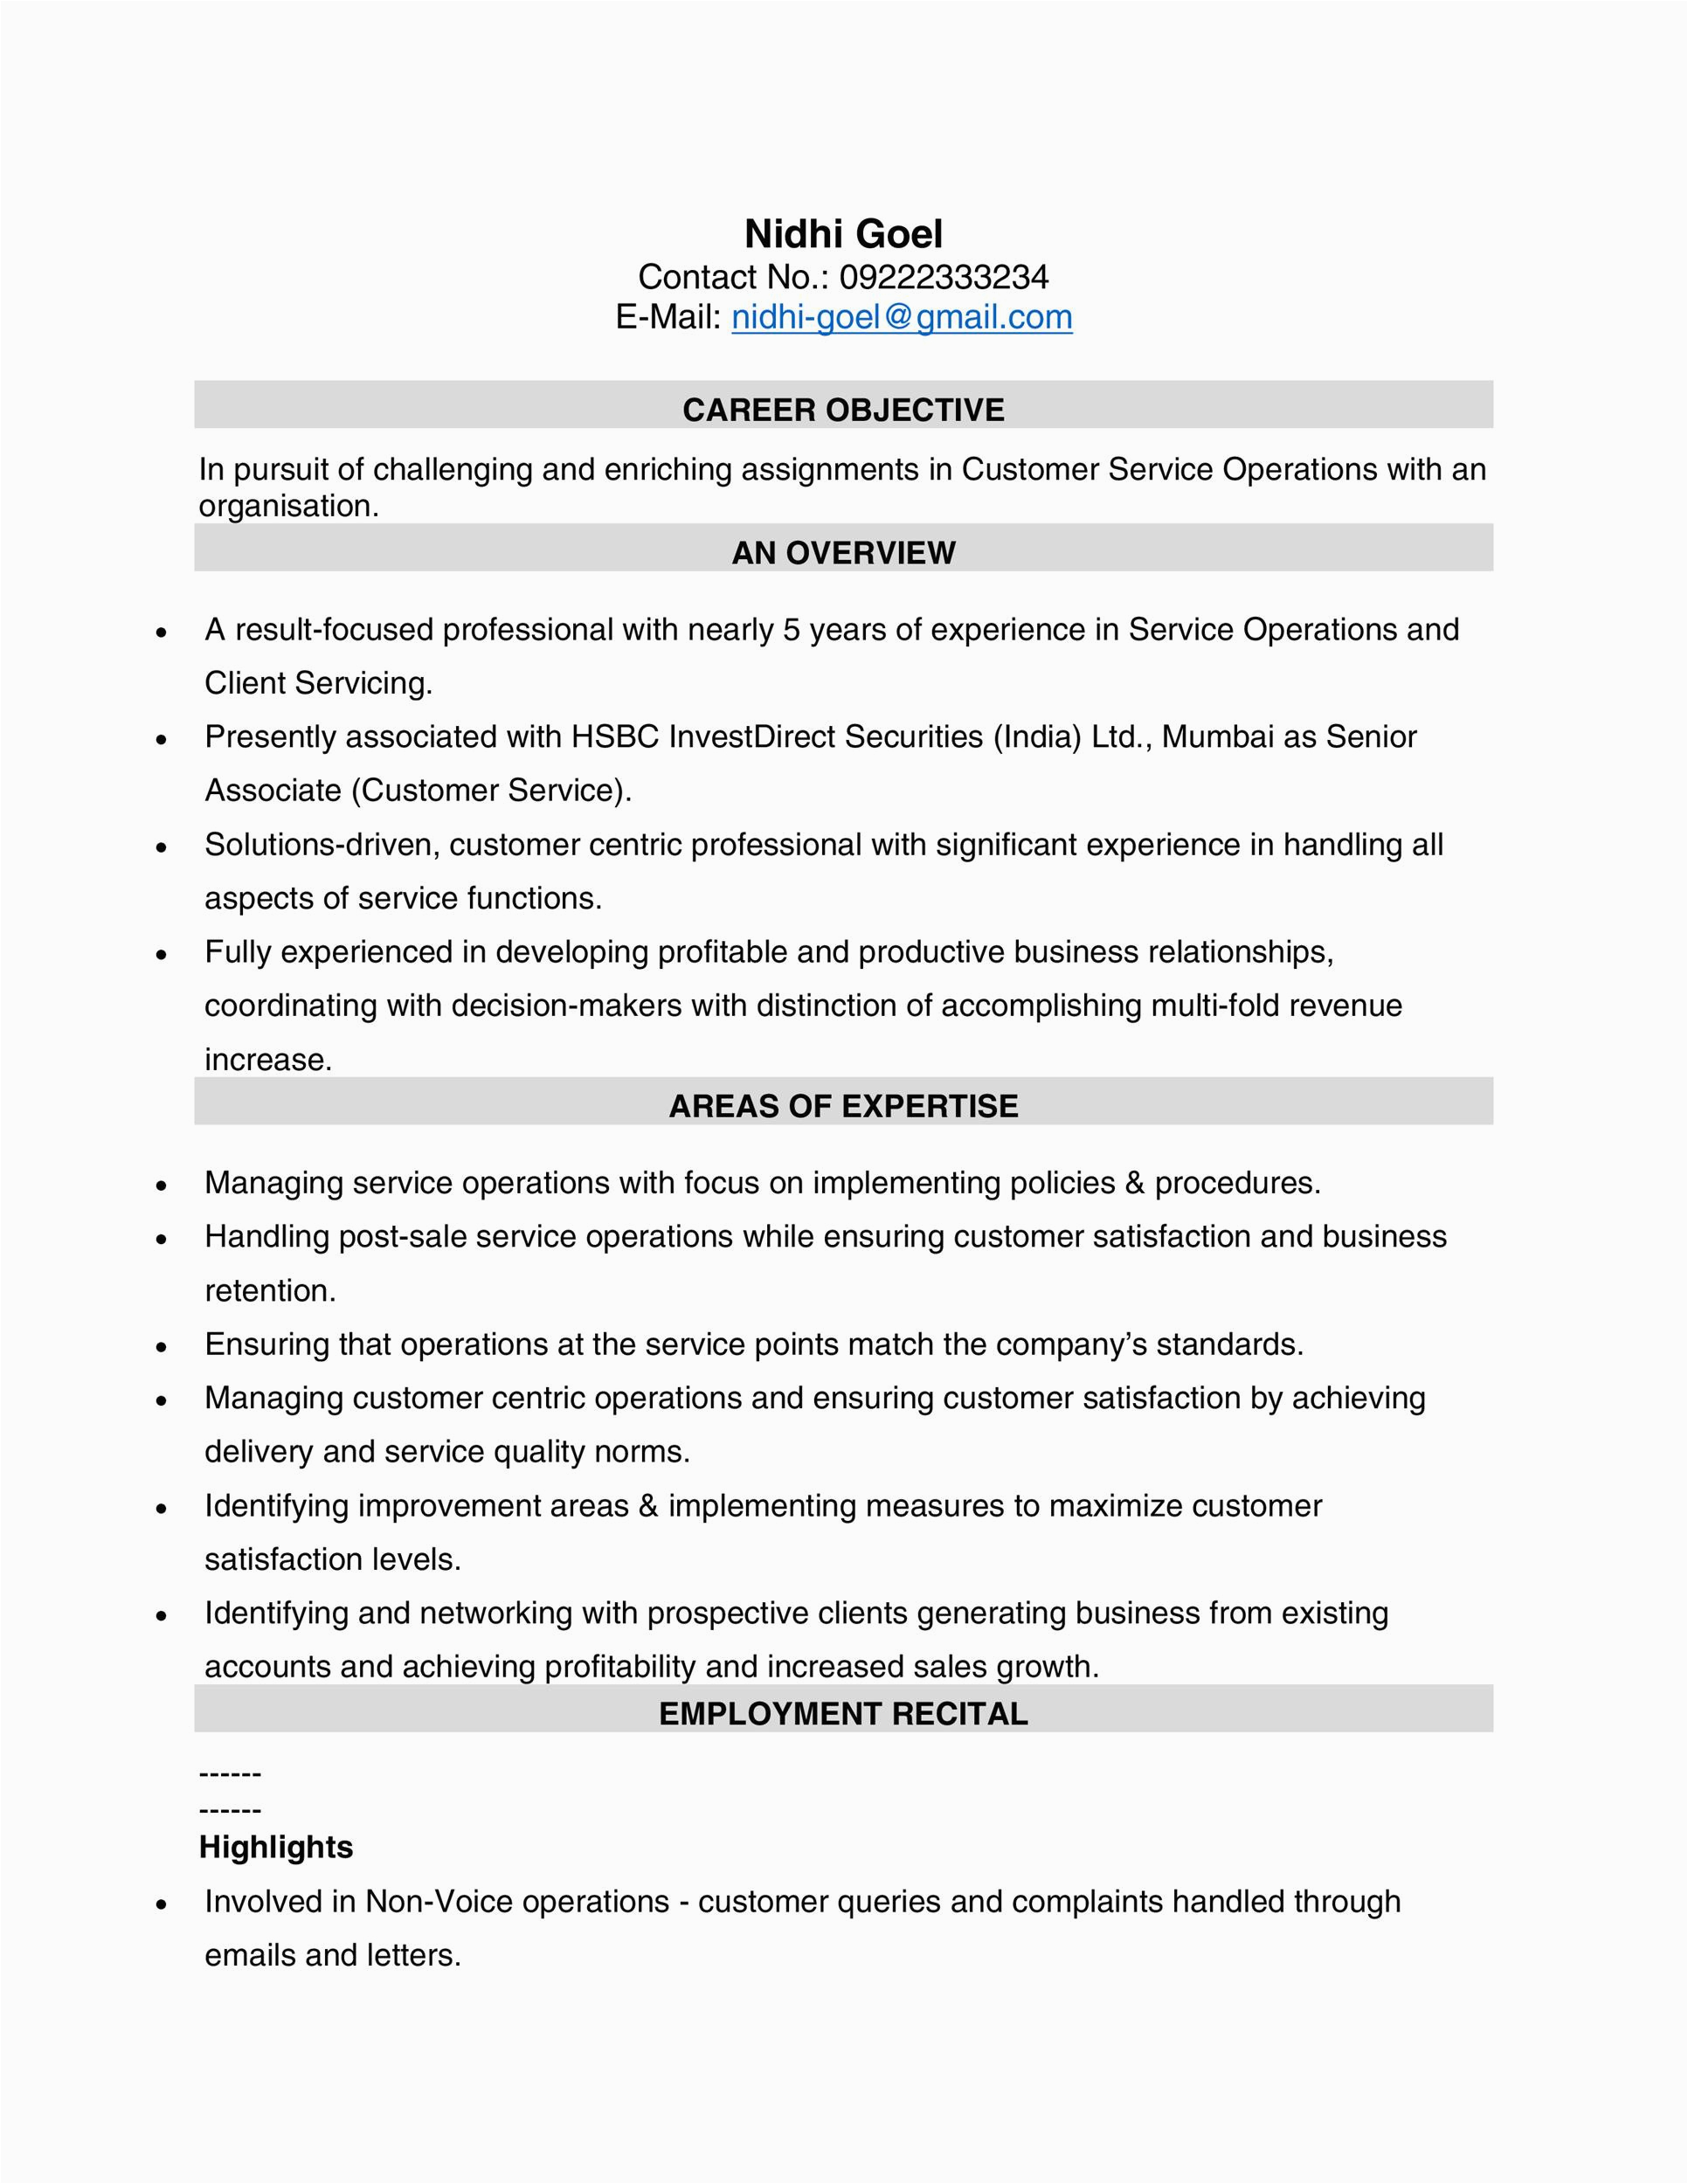 Sample for Resume for Customer Service 30 Customer Service Resume Examples Templatelab